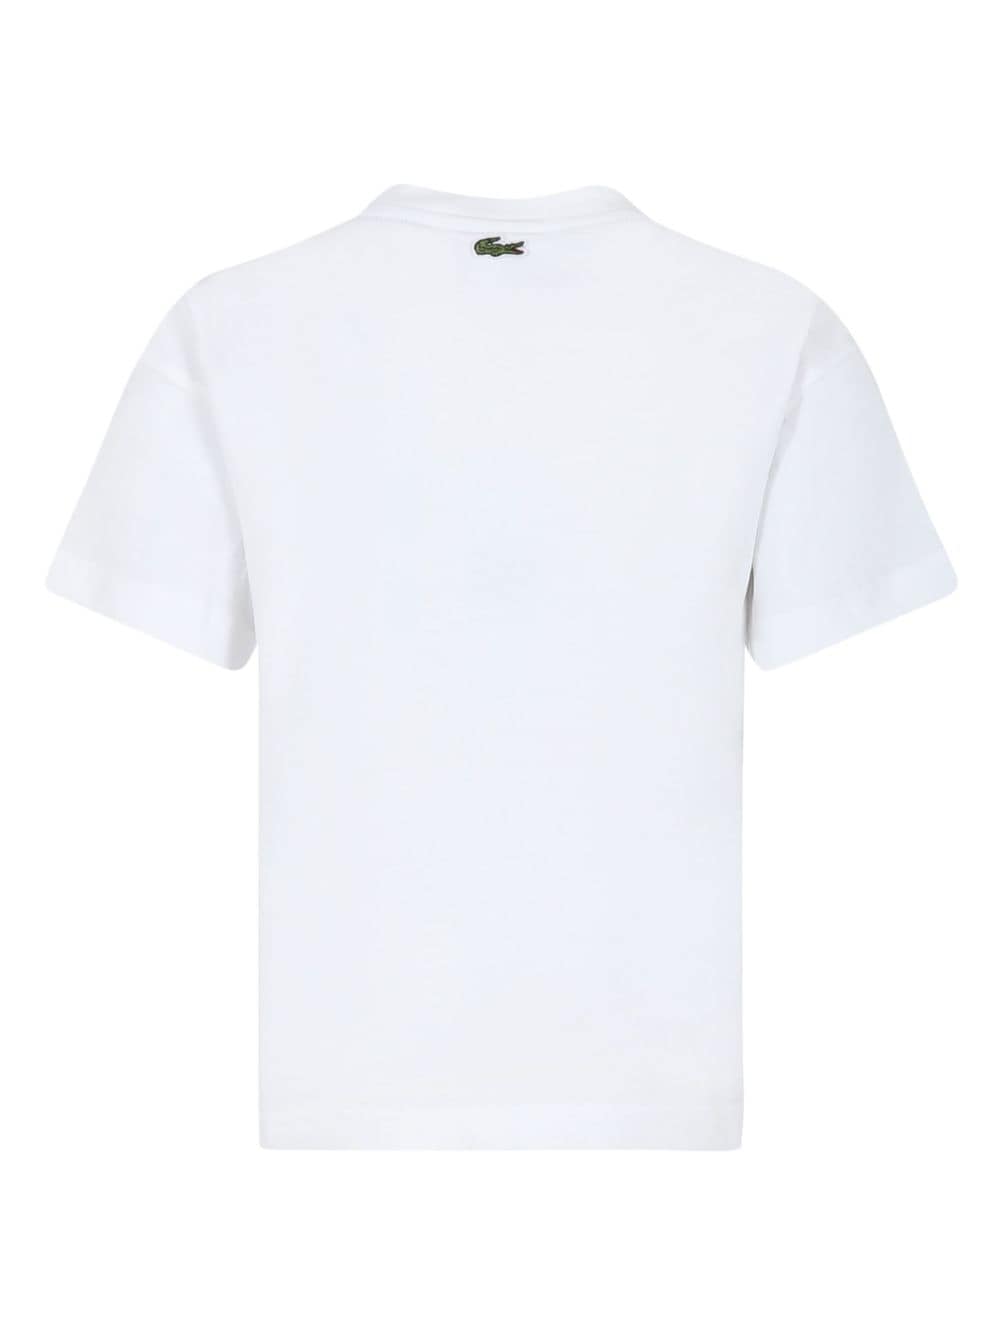 Lacoste Kids t-shirt con stampa